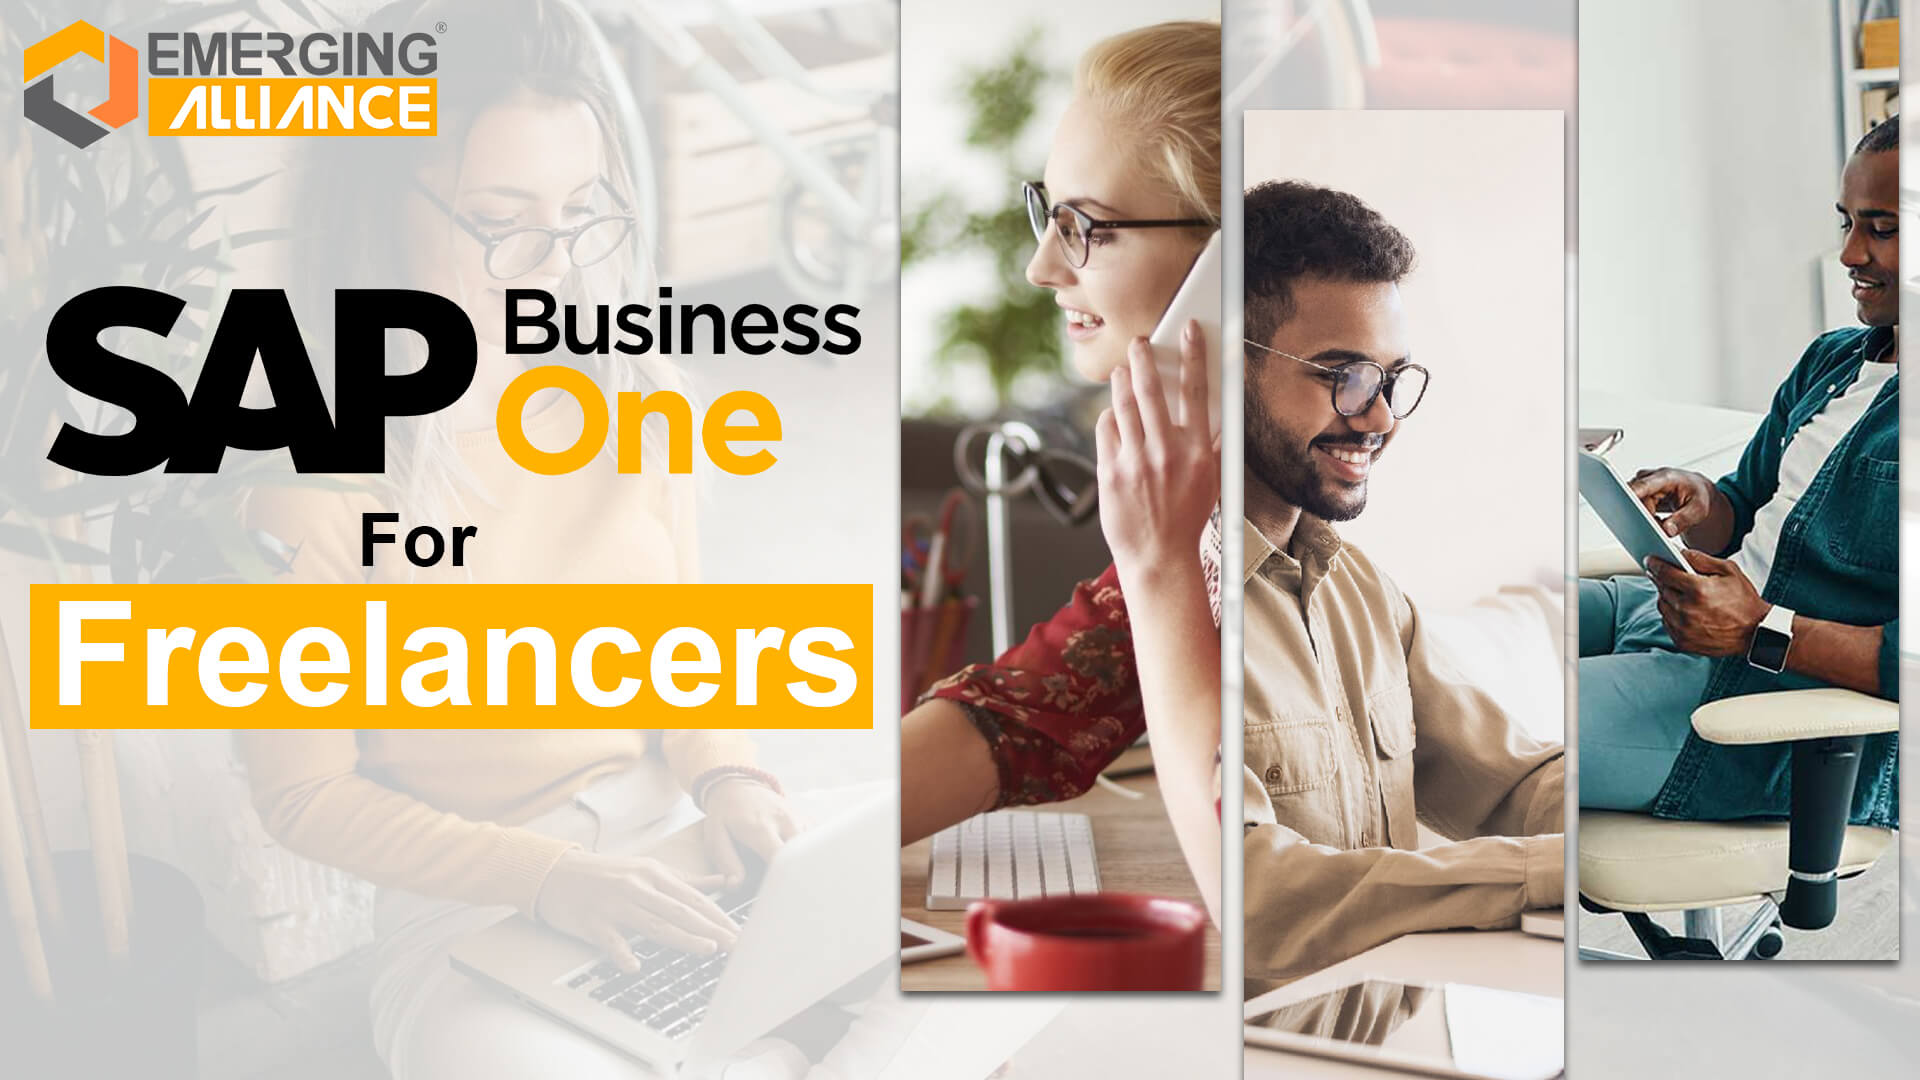 sap business one for freelancers